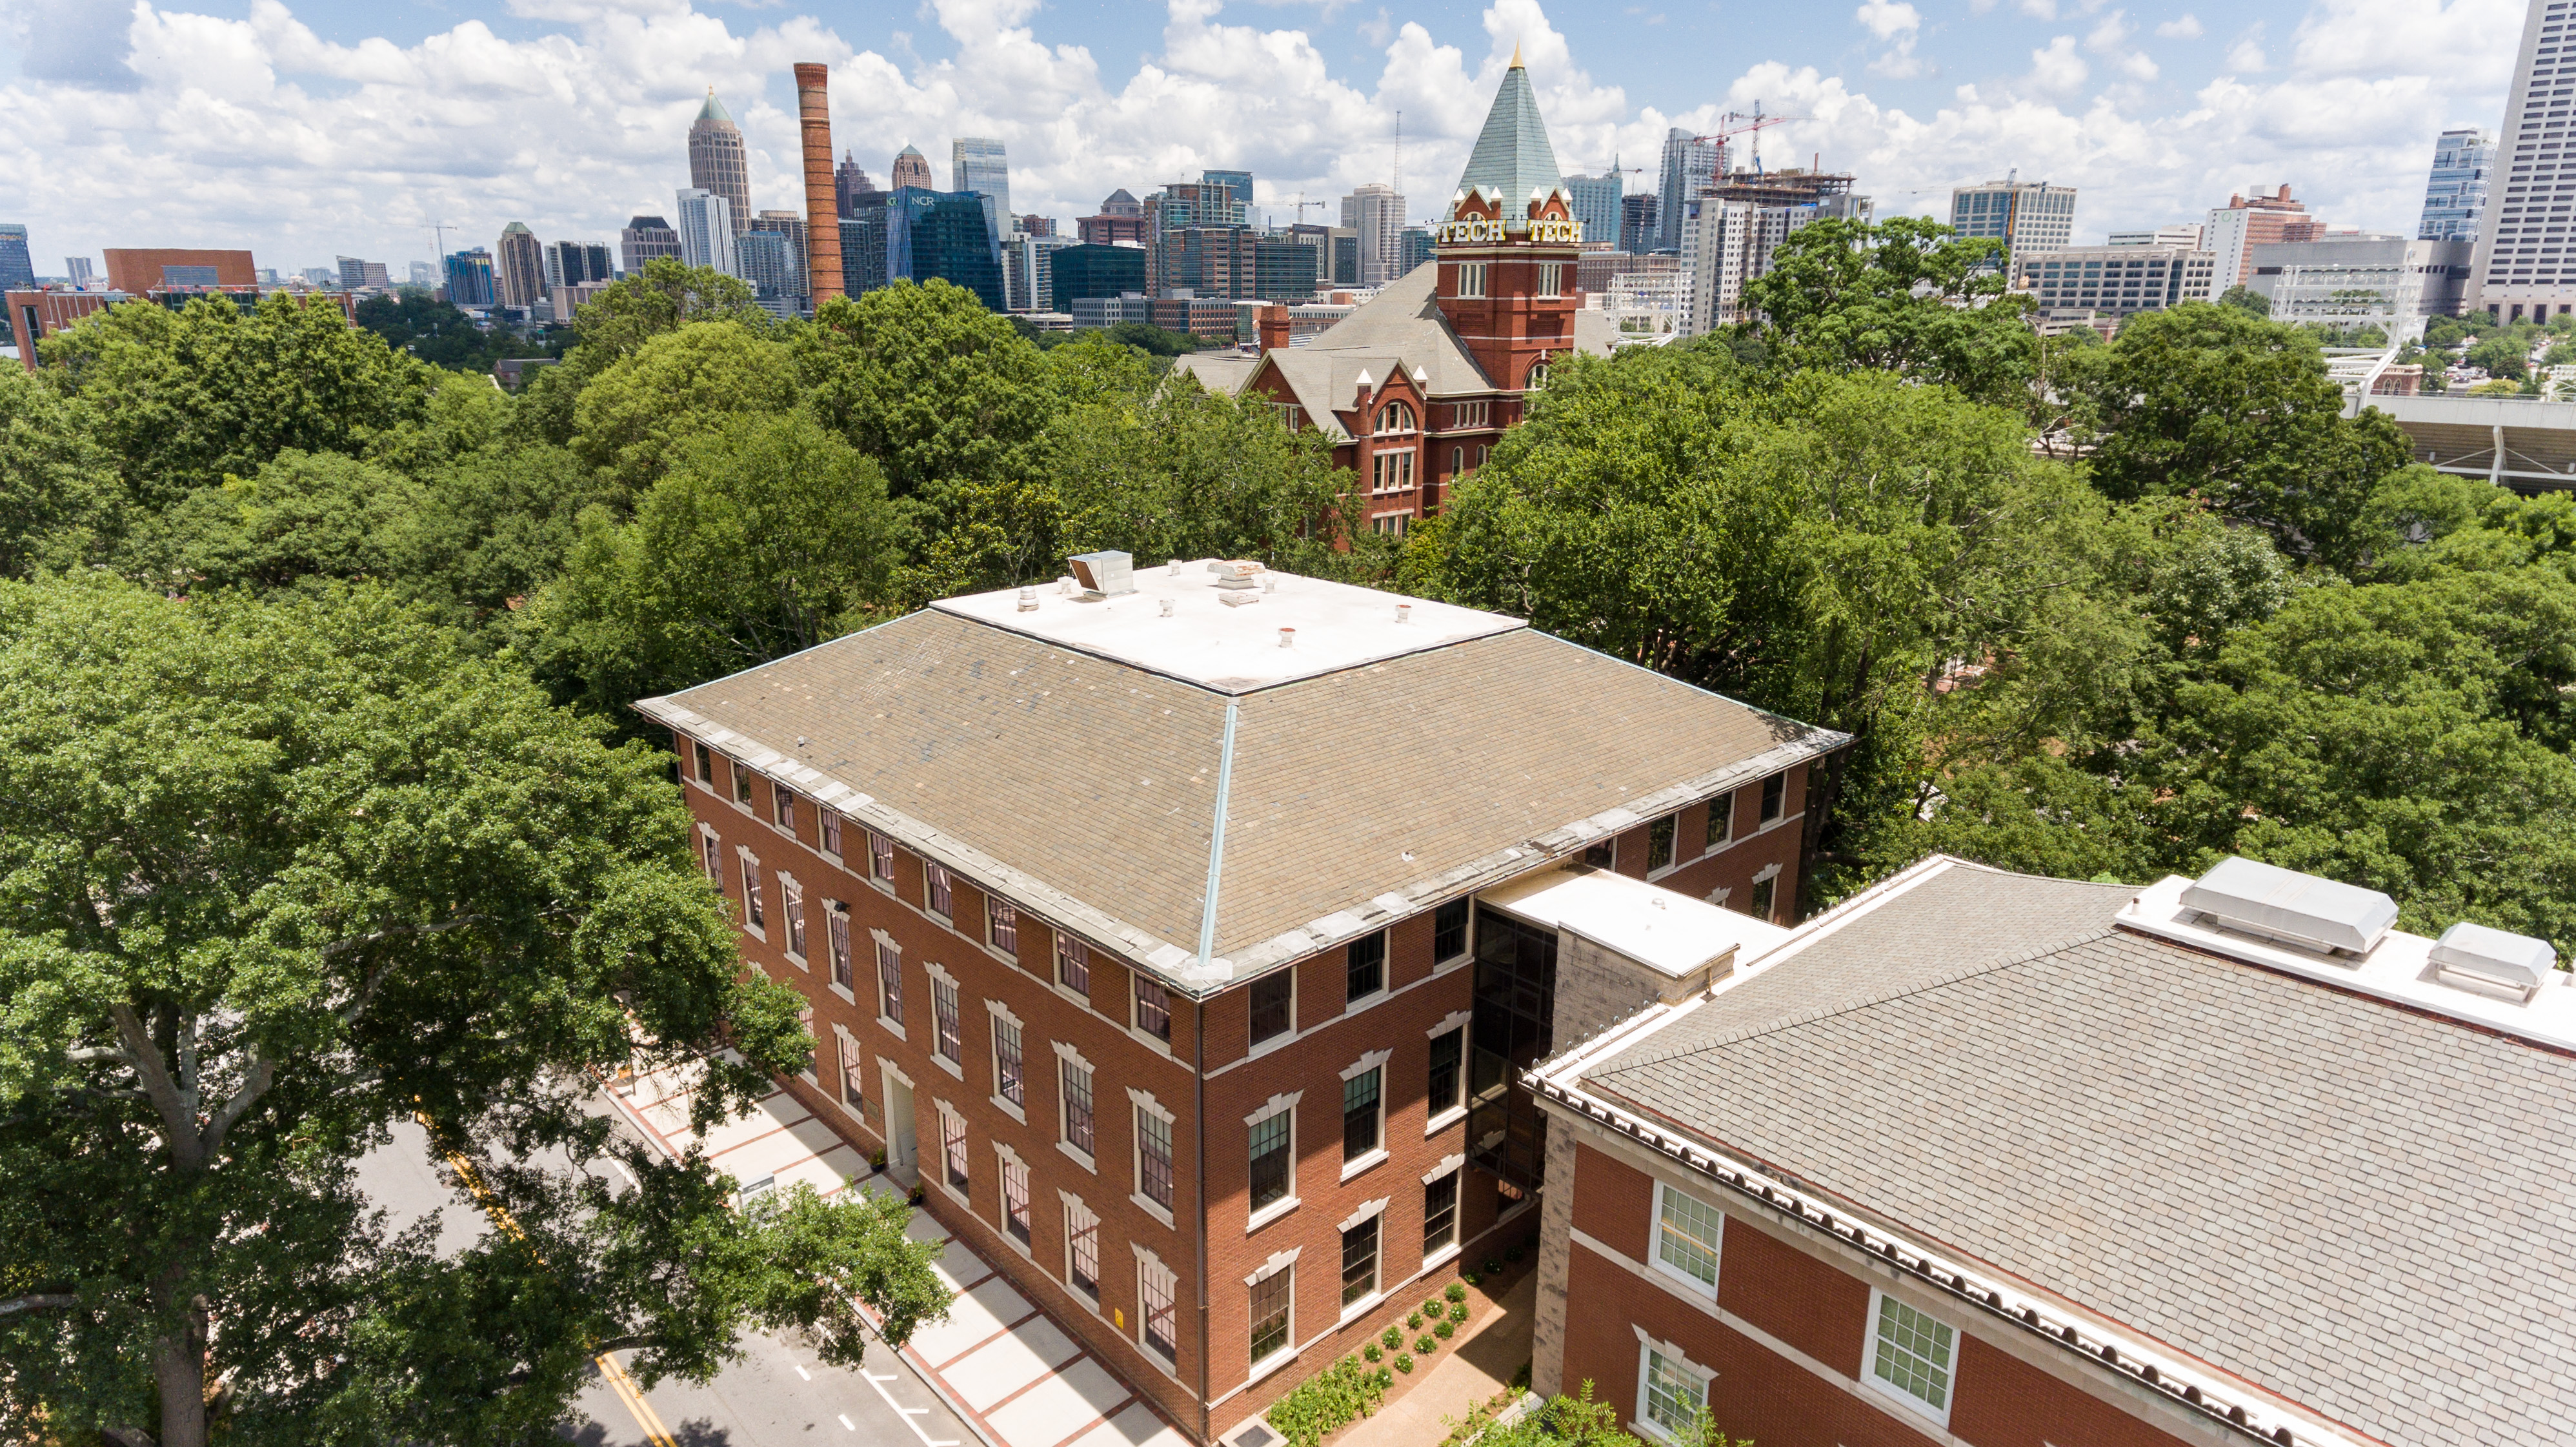 Aerial view of the Savant and Swann Buildings with lush green trees around them. Tech Tower stands tall behind them with the Atlanta skyline in the distance.